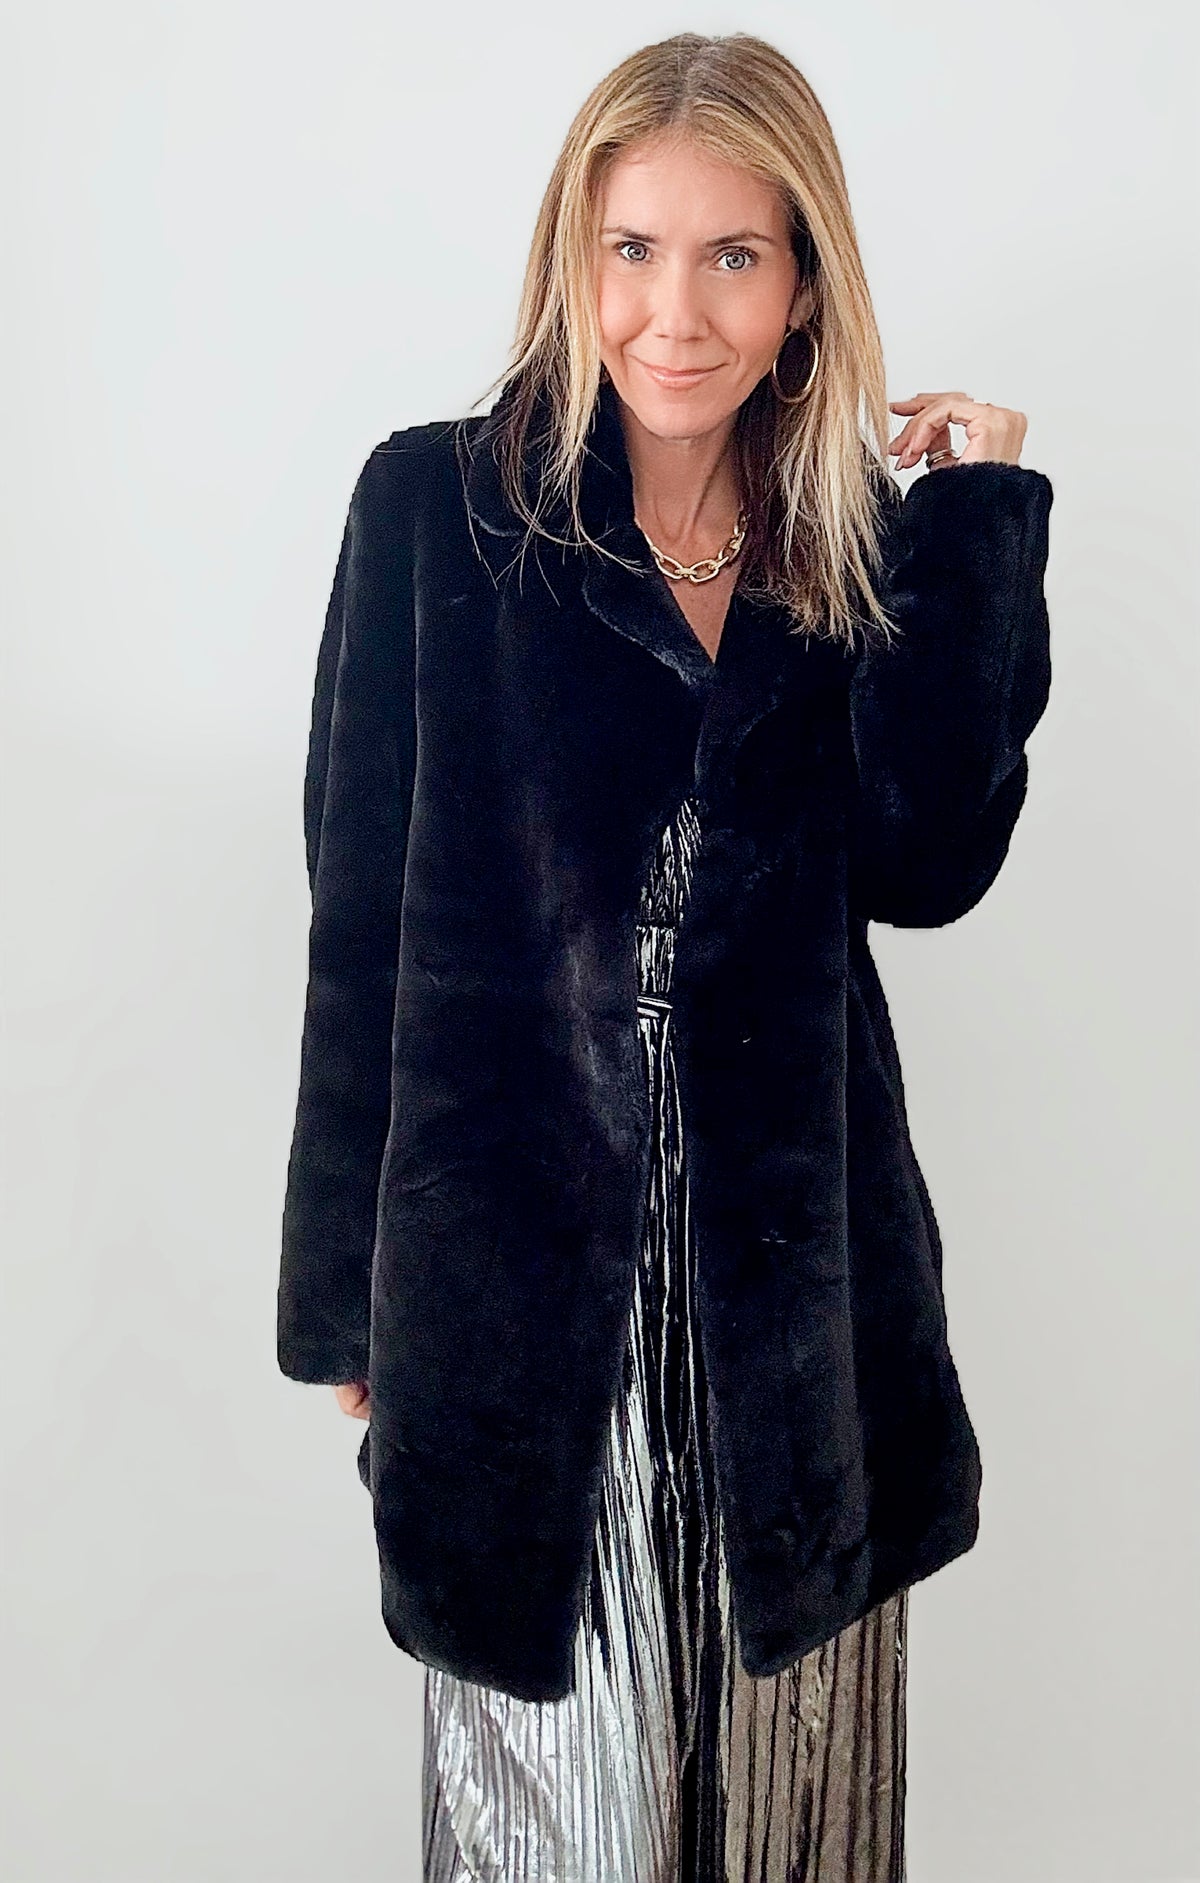 Bundle Me Up Faux Fur Coat - Black-150 Cardigan Layers-Dolce Cabo-Coastal Bloom Boutique, find the trendiest versions of the popular styles and looks Located in Indialantic, FL